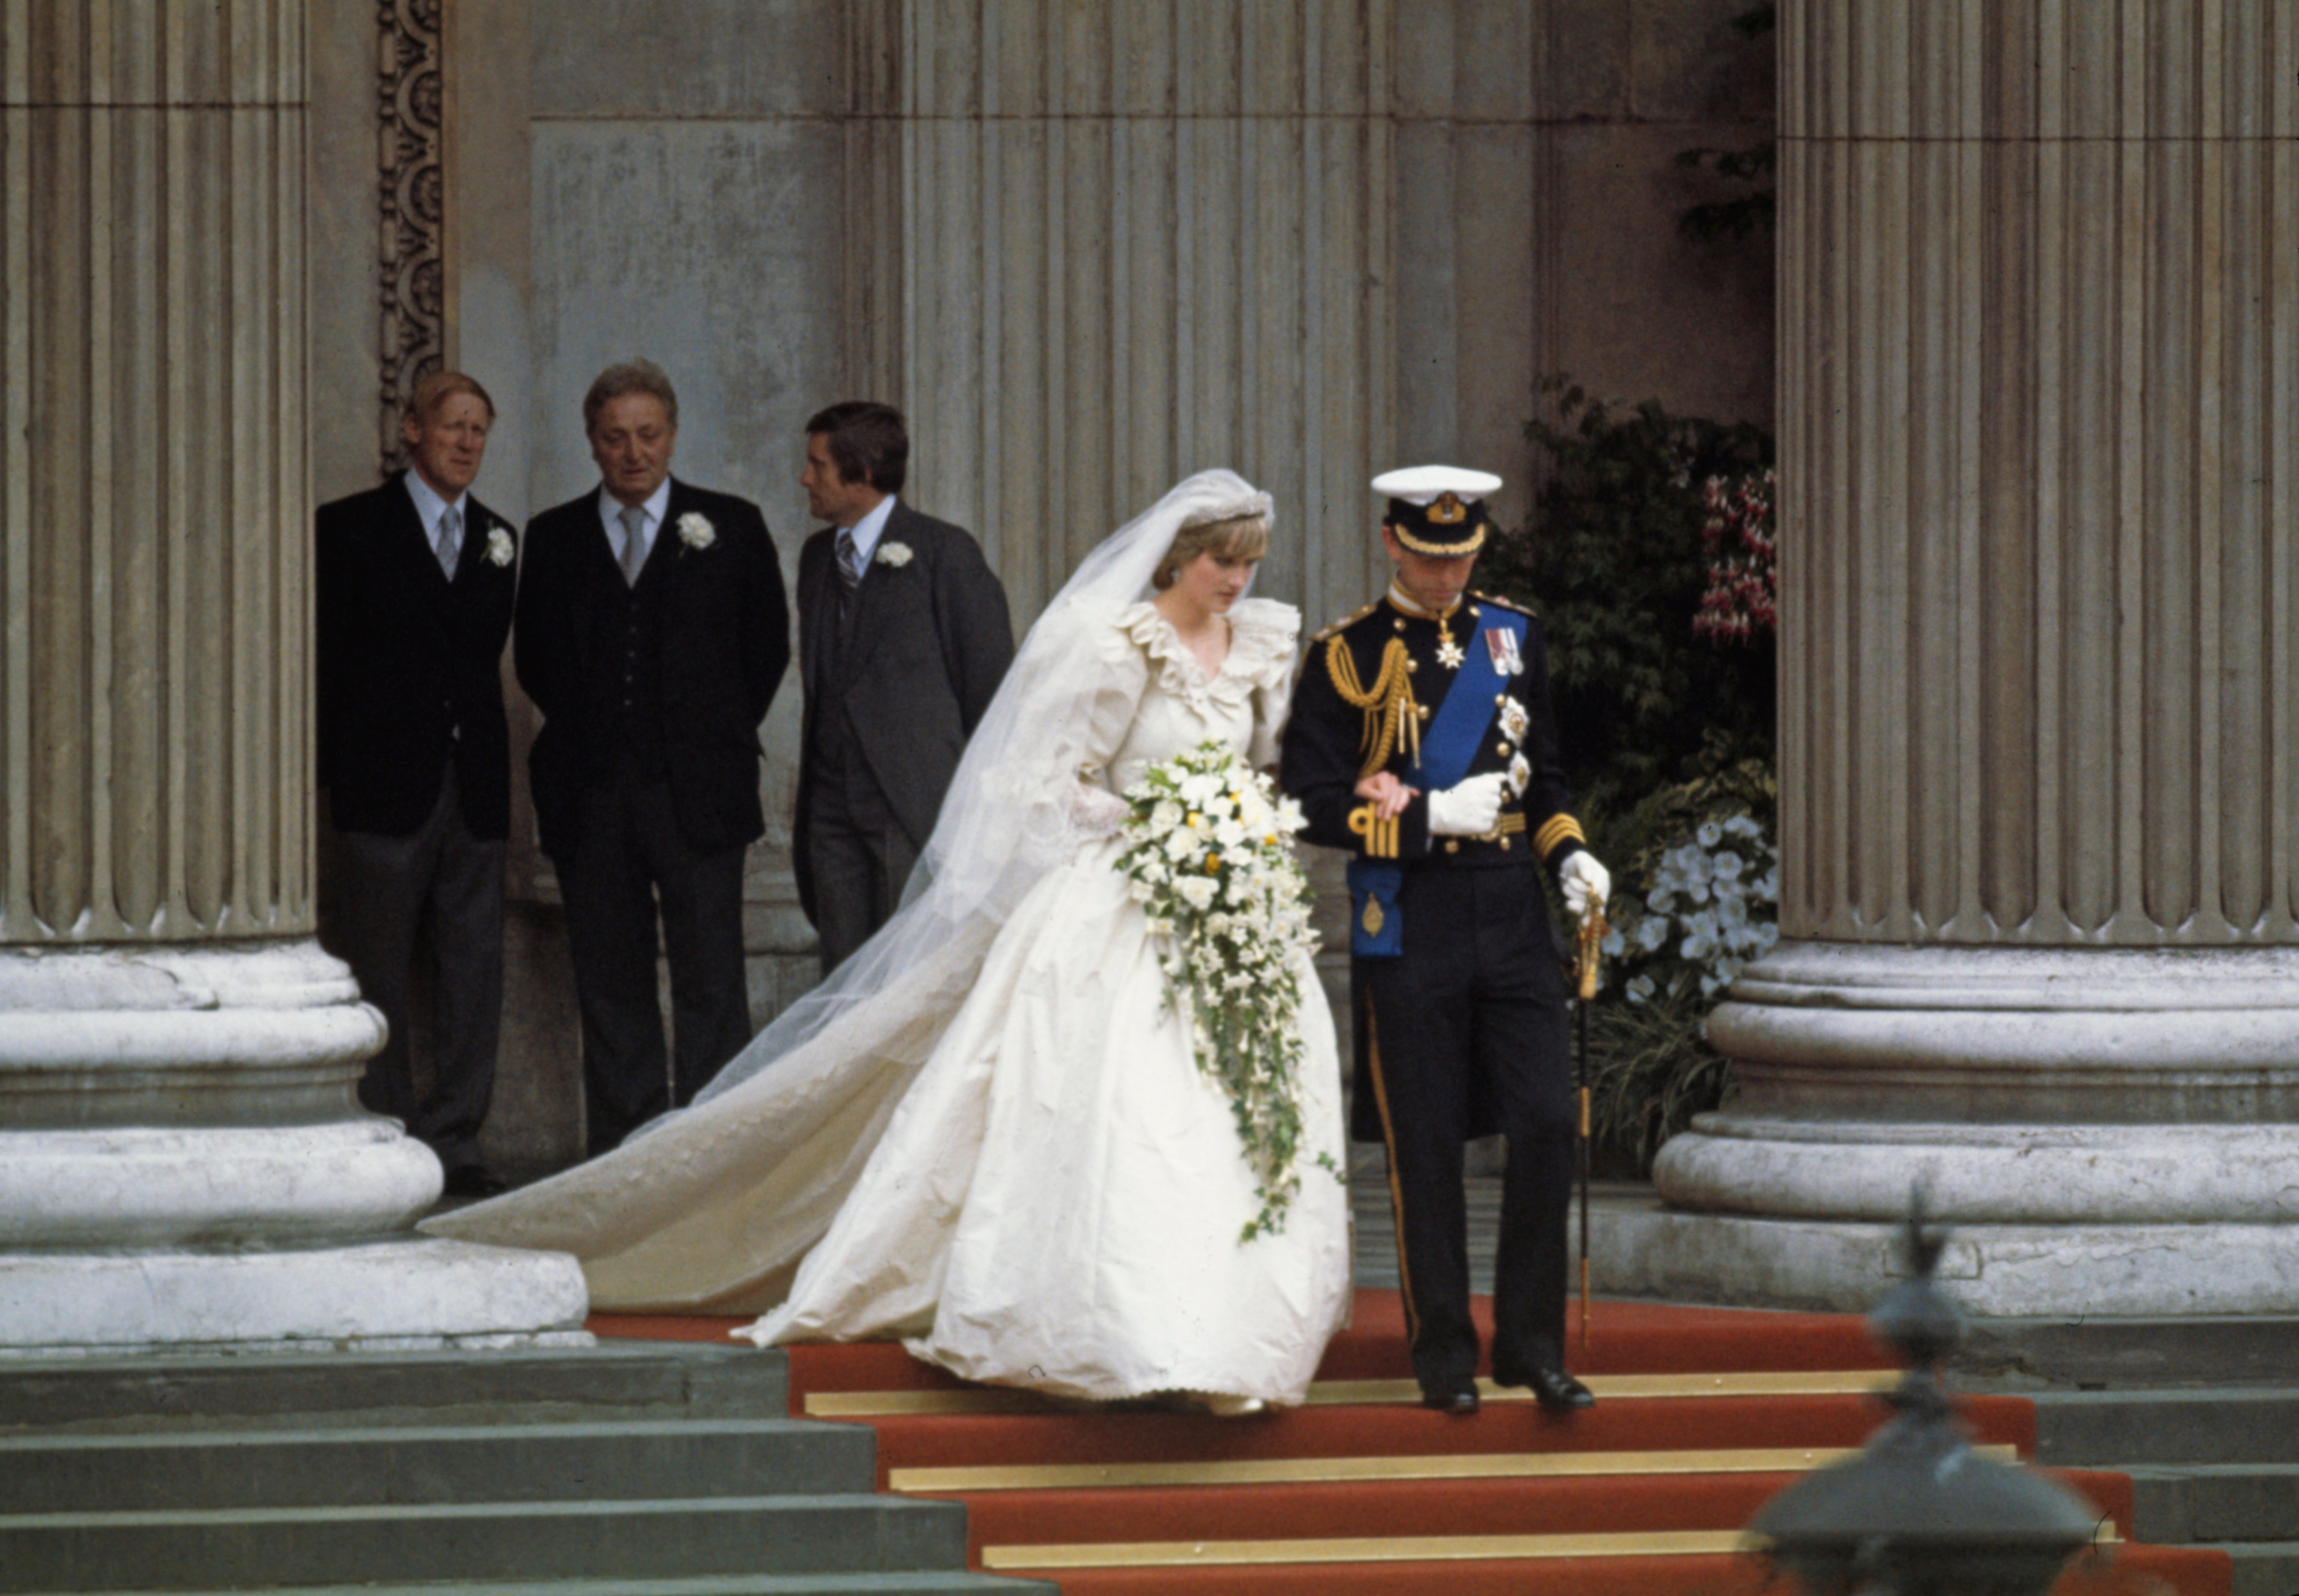 Prince Charles and Princess Diana leaving St Paul’s Cathedral in London after the wedding ceremony